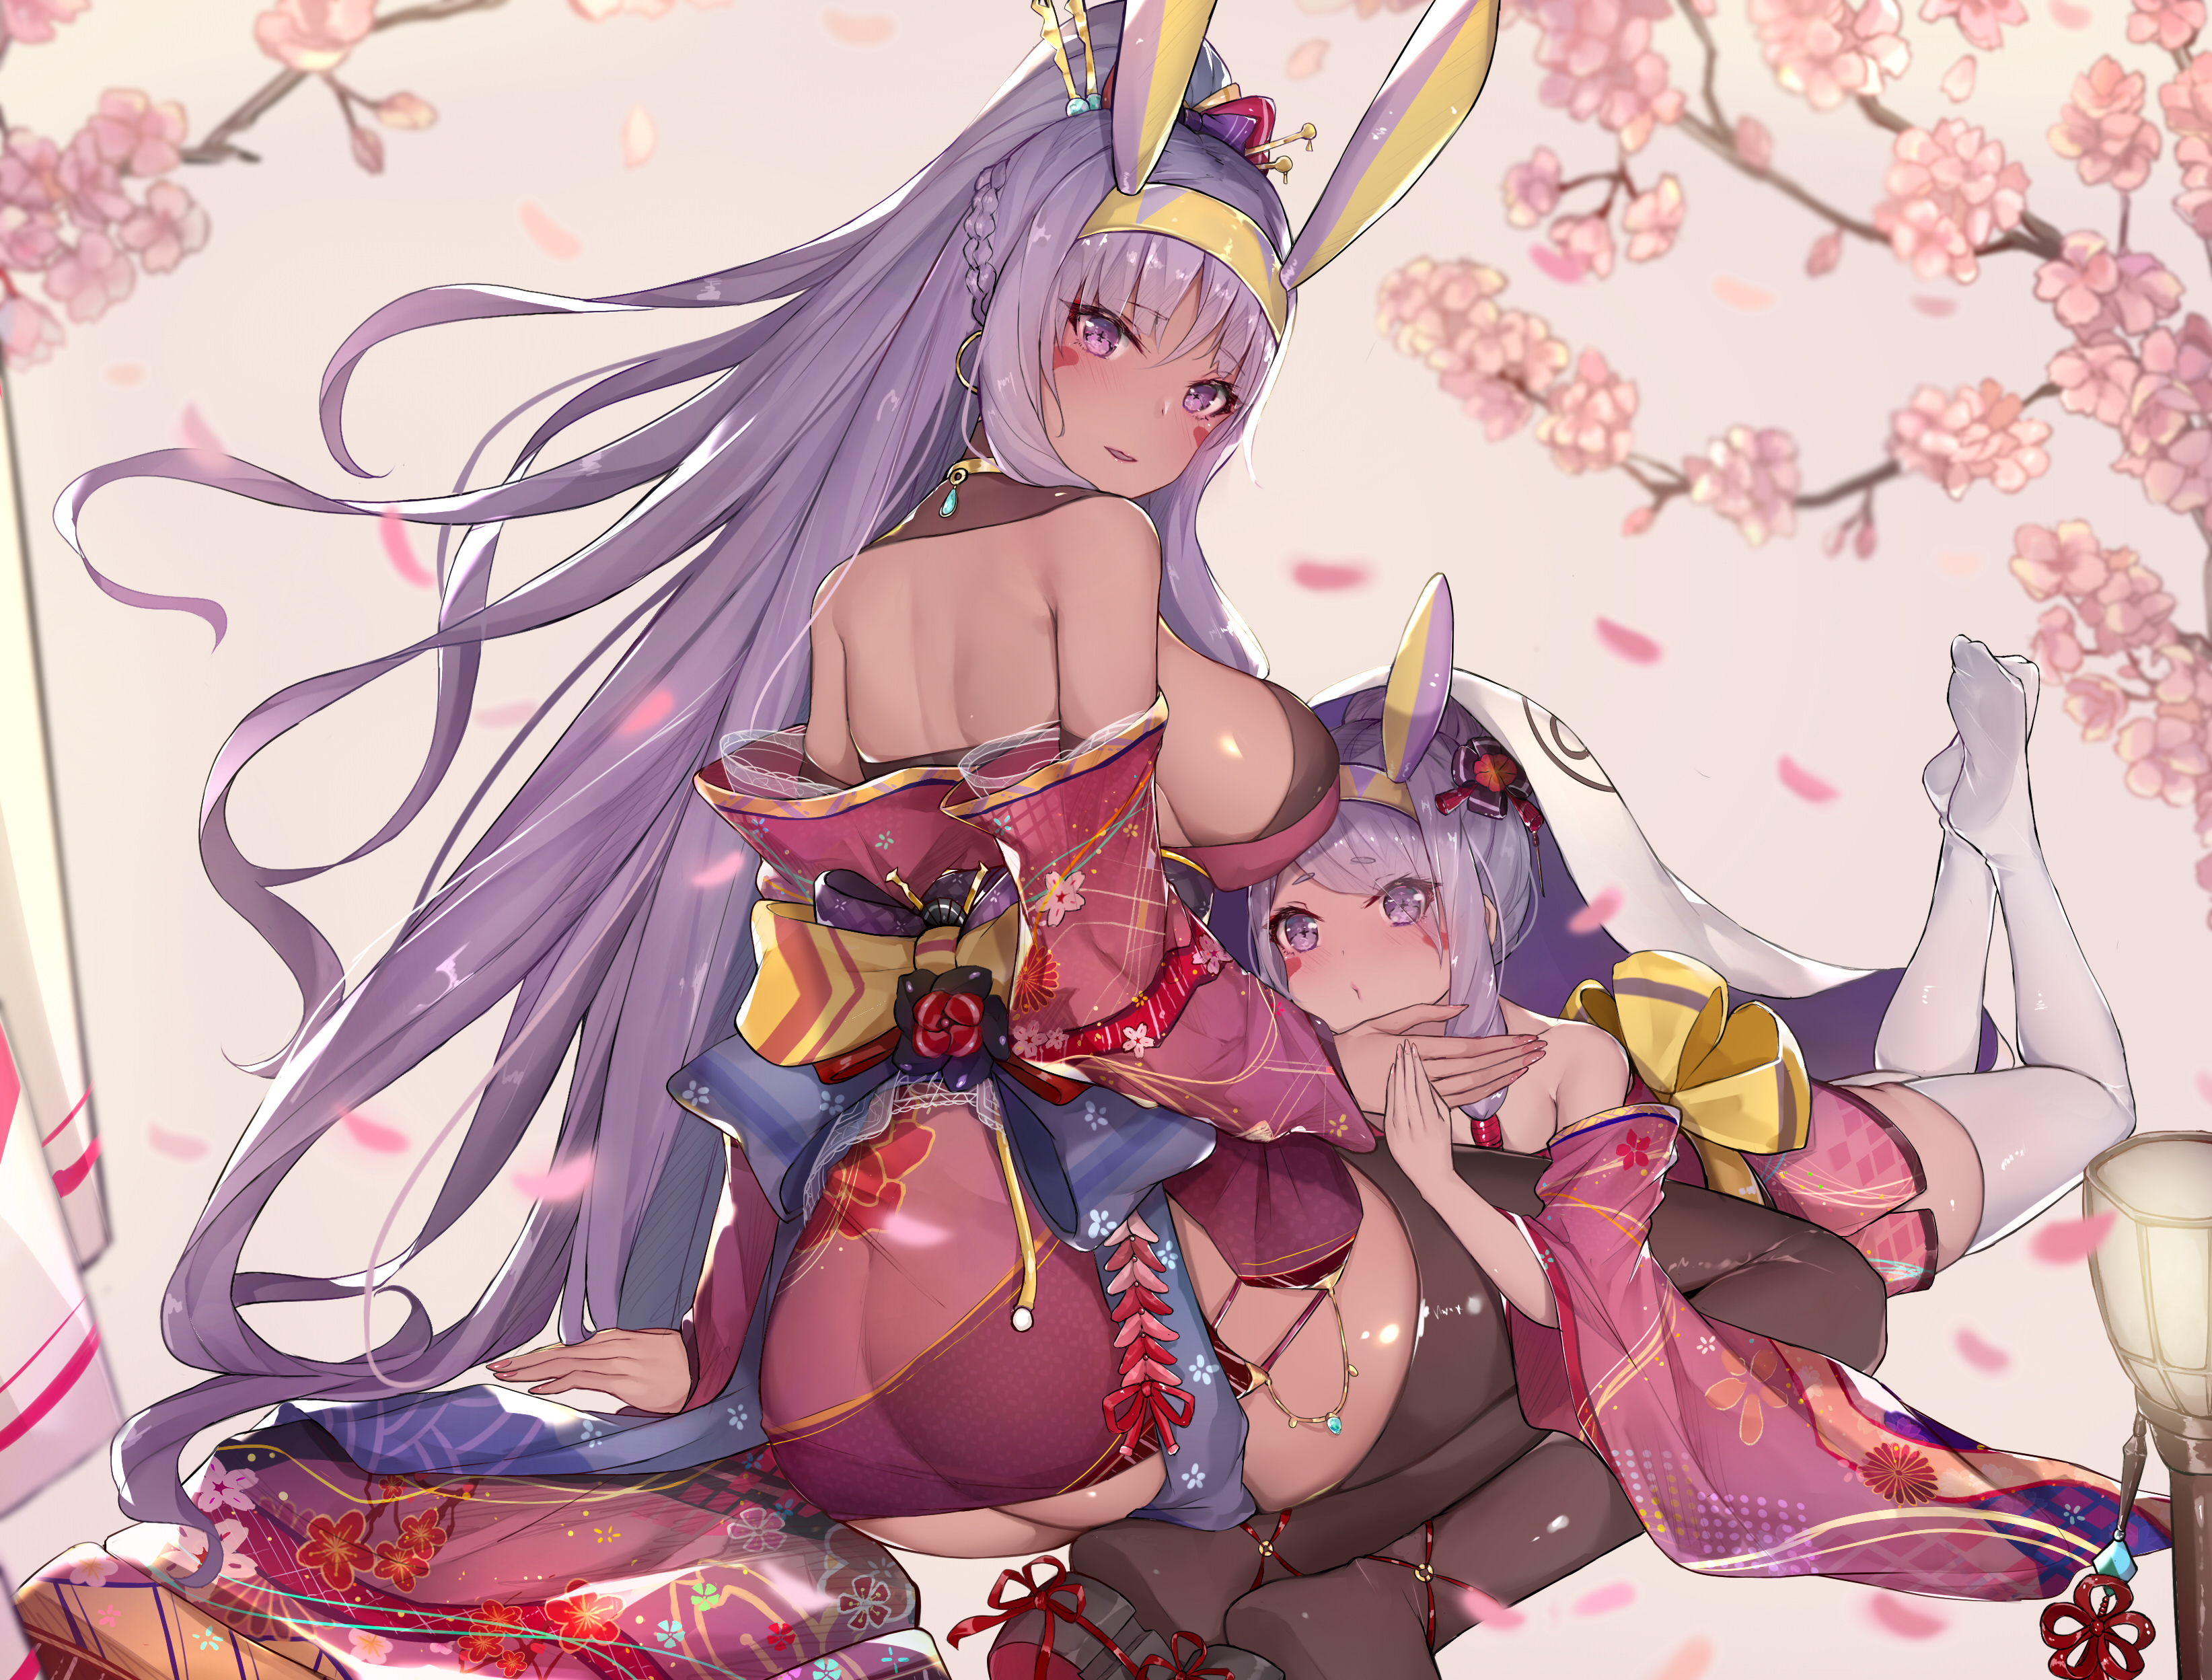 Anime 3288x2497 Fate/Grand Order Nitocris (Fate/Grand Order) ass blushing long hair purple hair purple eyes thighs ponytail loli flowers anime cherry blossom thigh-highs Japanese clothes sideboob animal ears anime girls Fate series sherryQQ